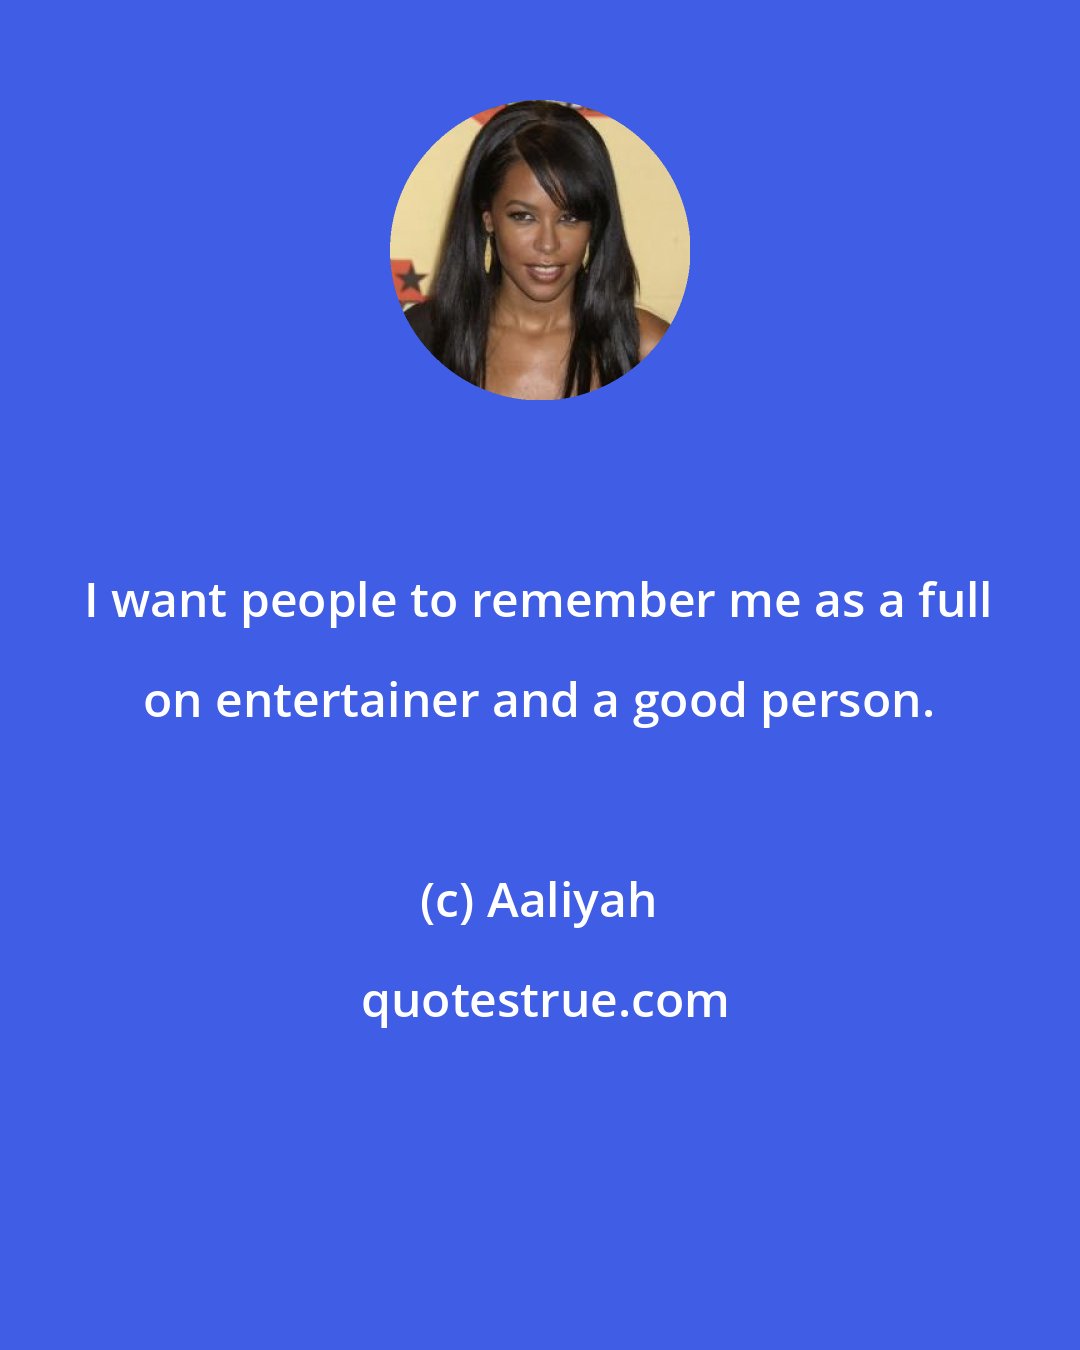 Aaliyah: I want people to remember me as a full on entertainer and a good person.